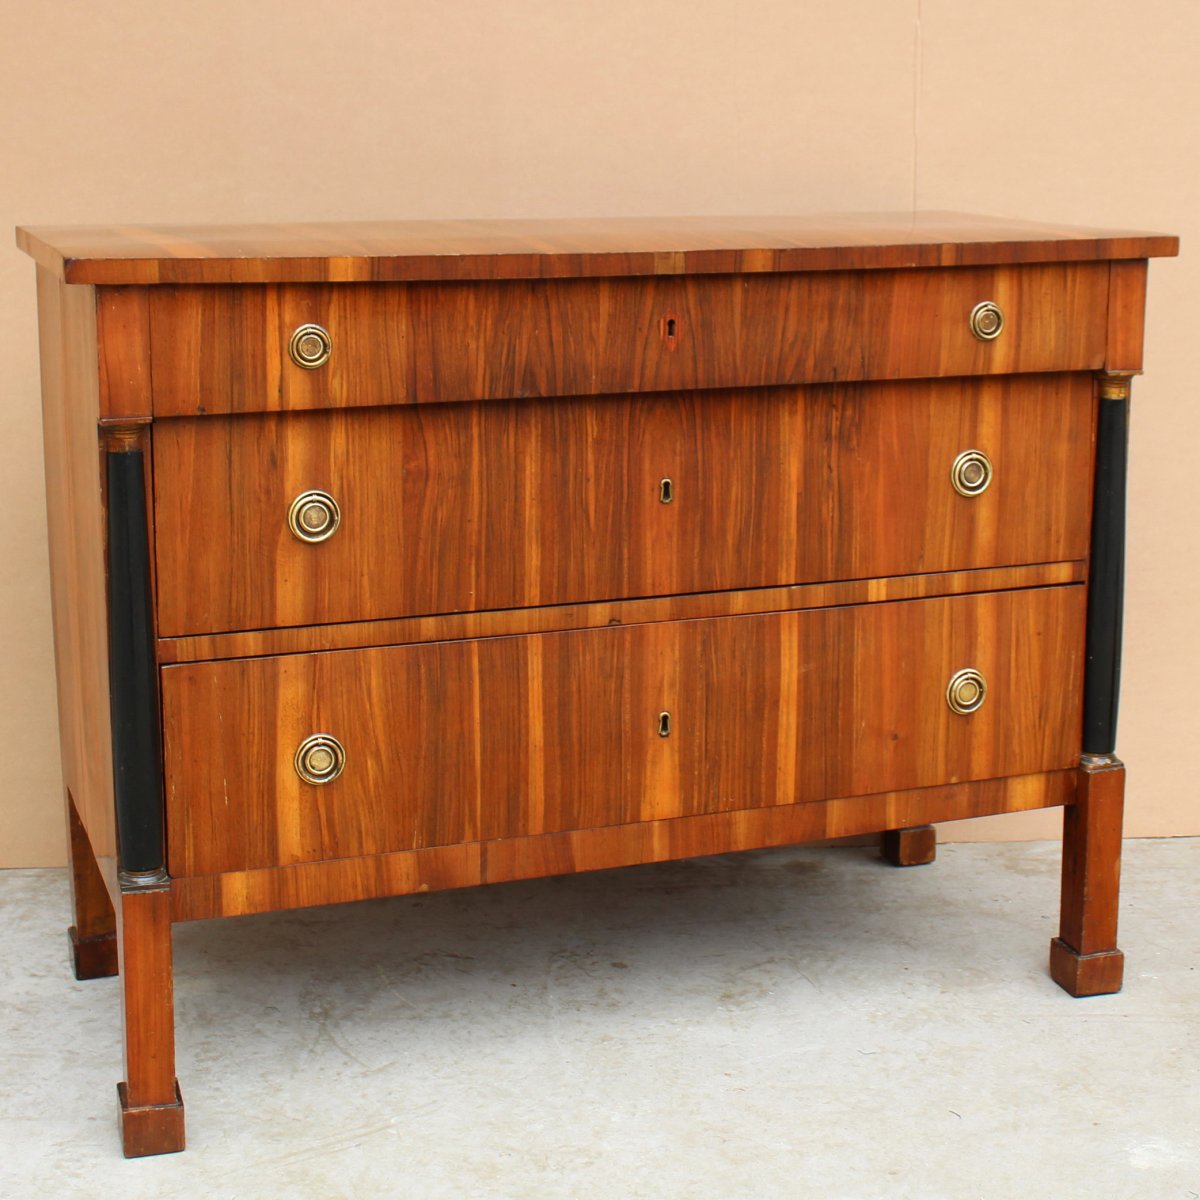 Antique Empire Dresser Commode Chest Of Drawers In Walnut - Italy 19th Century-photo-2